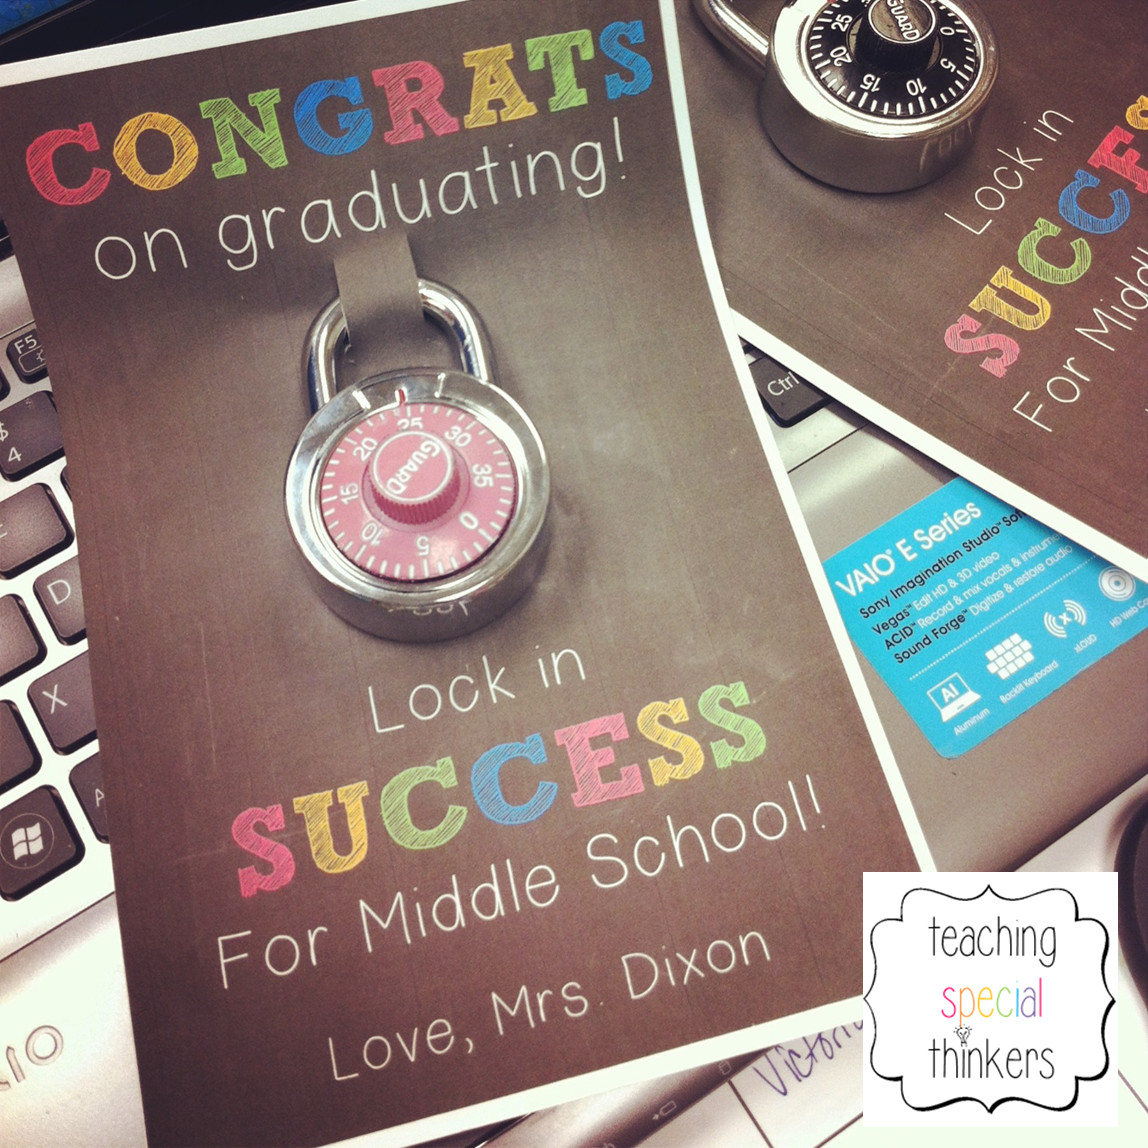 6Th Grade Graduation Gift Ideas
 Lock in Success – Student Gift for soon to be Middle